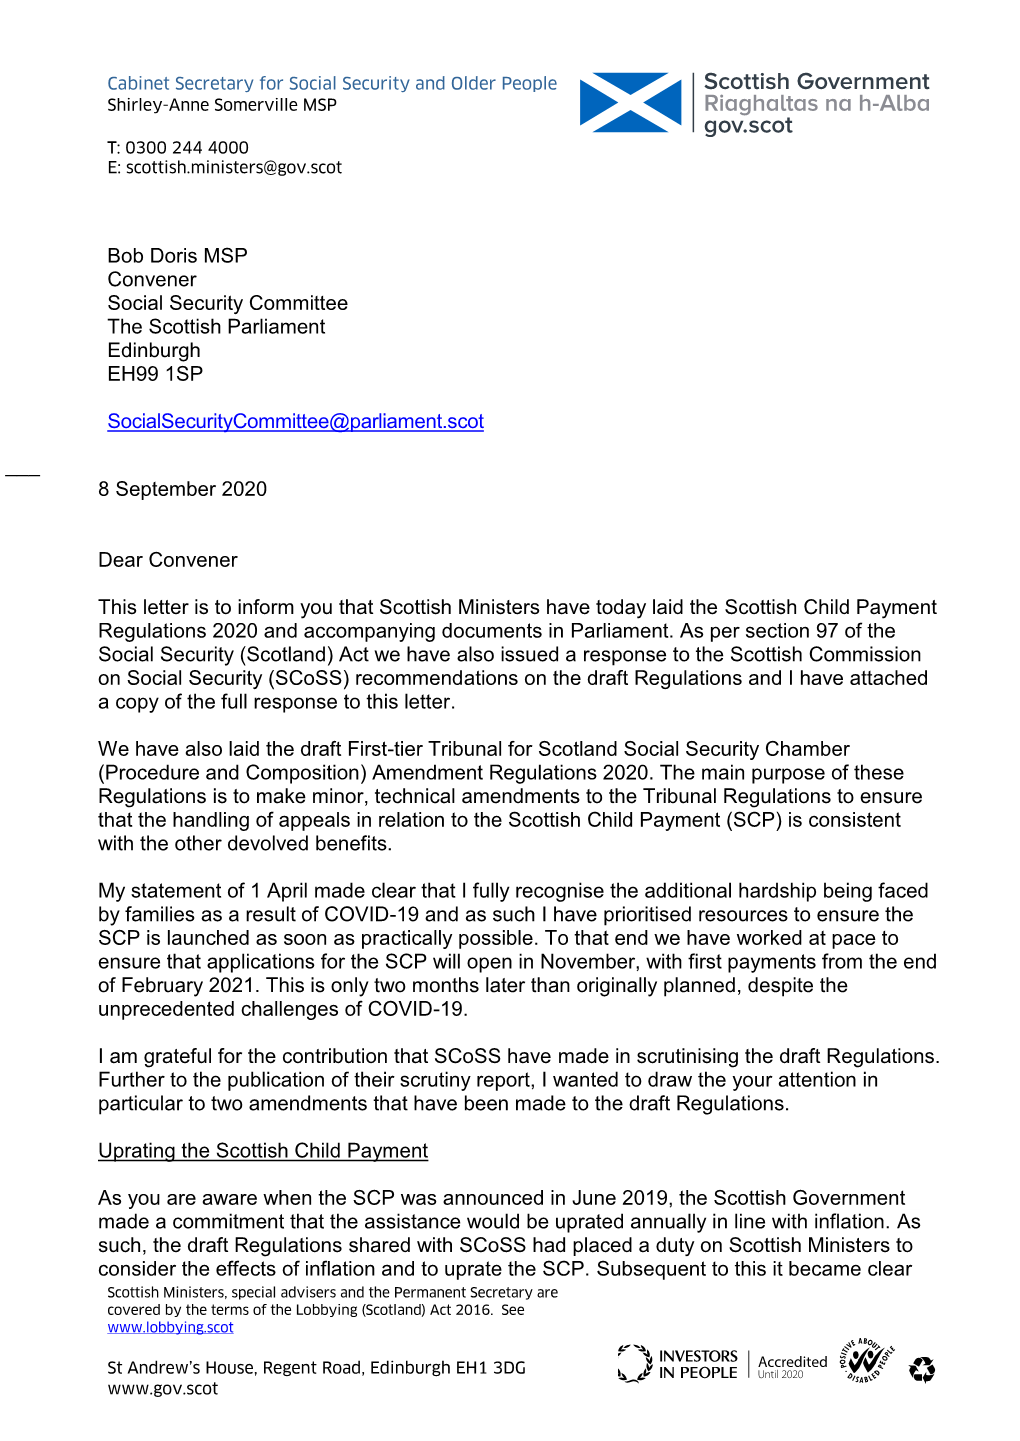 Letter Is to Inform You That Scottish Ministers Have Today Laid the Scottish Child Payment Regulations 2020 and Accompanying Documents in Parliament